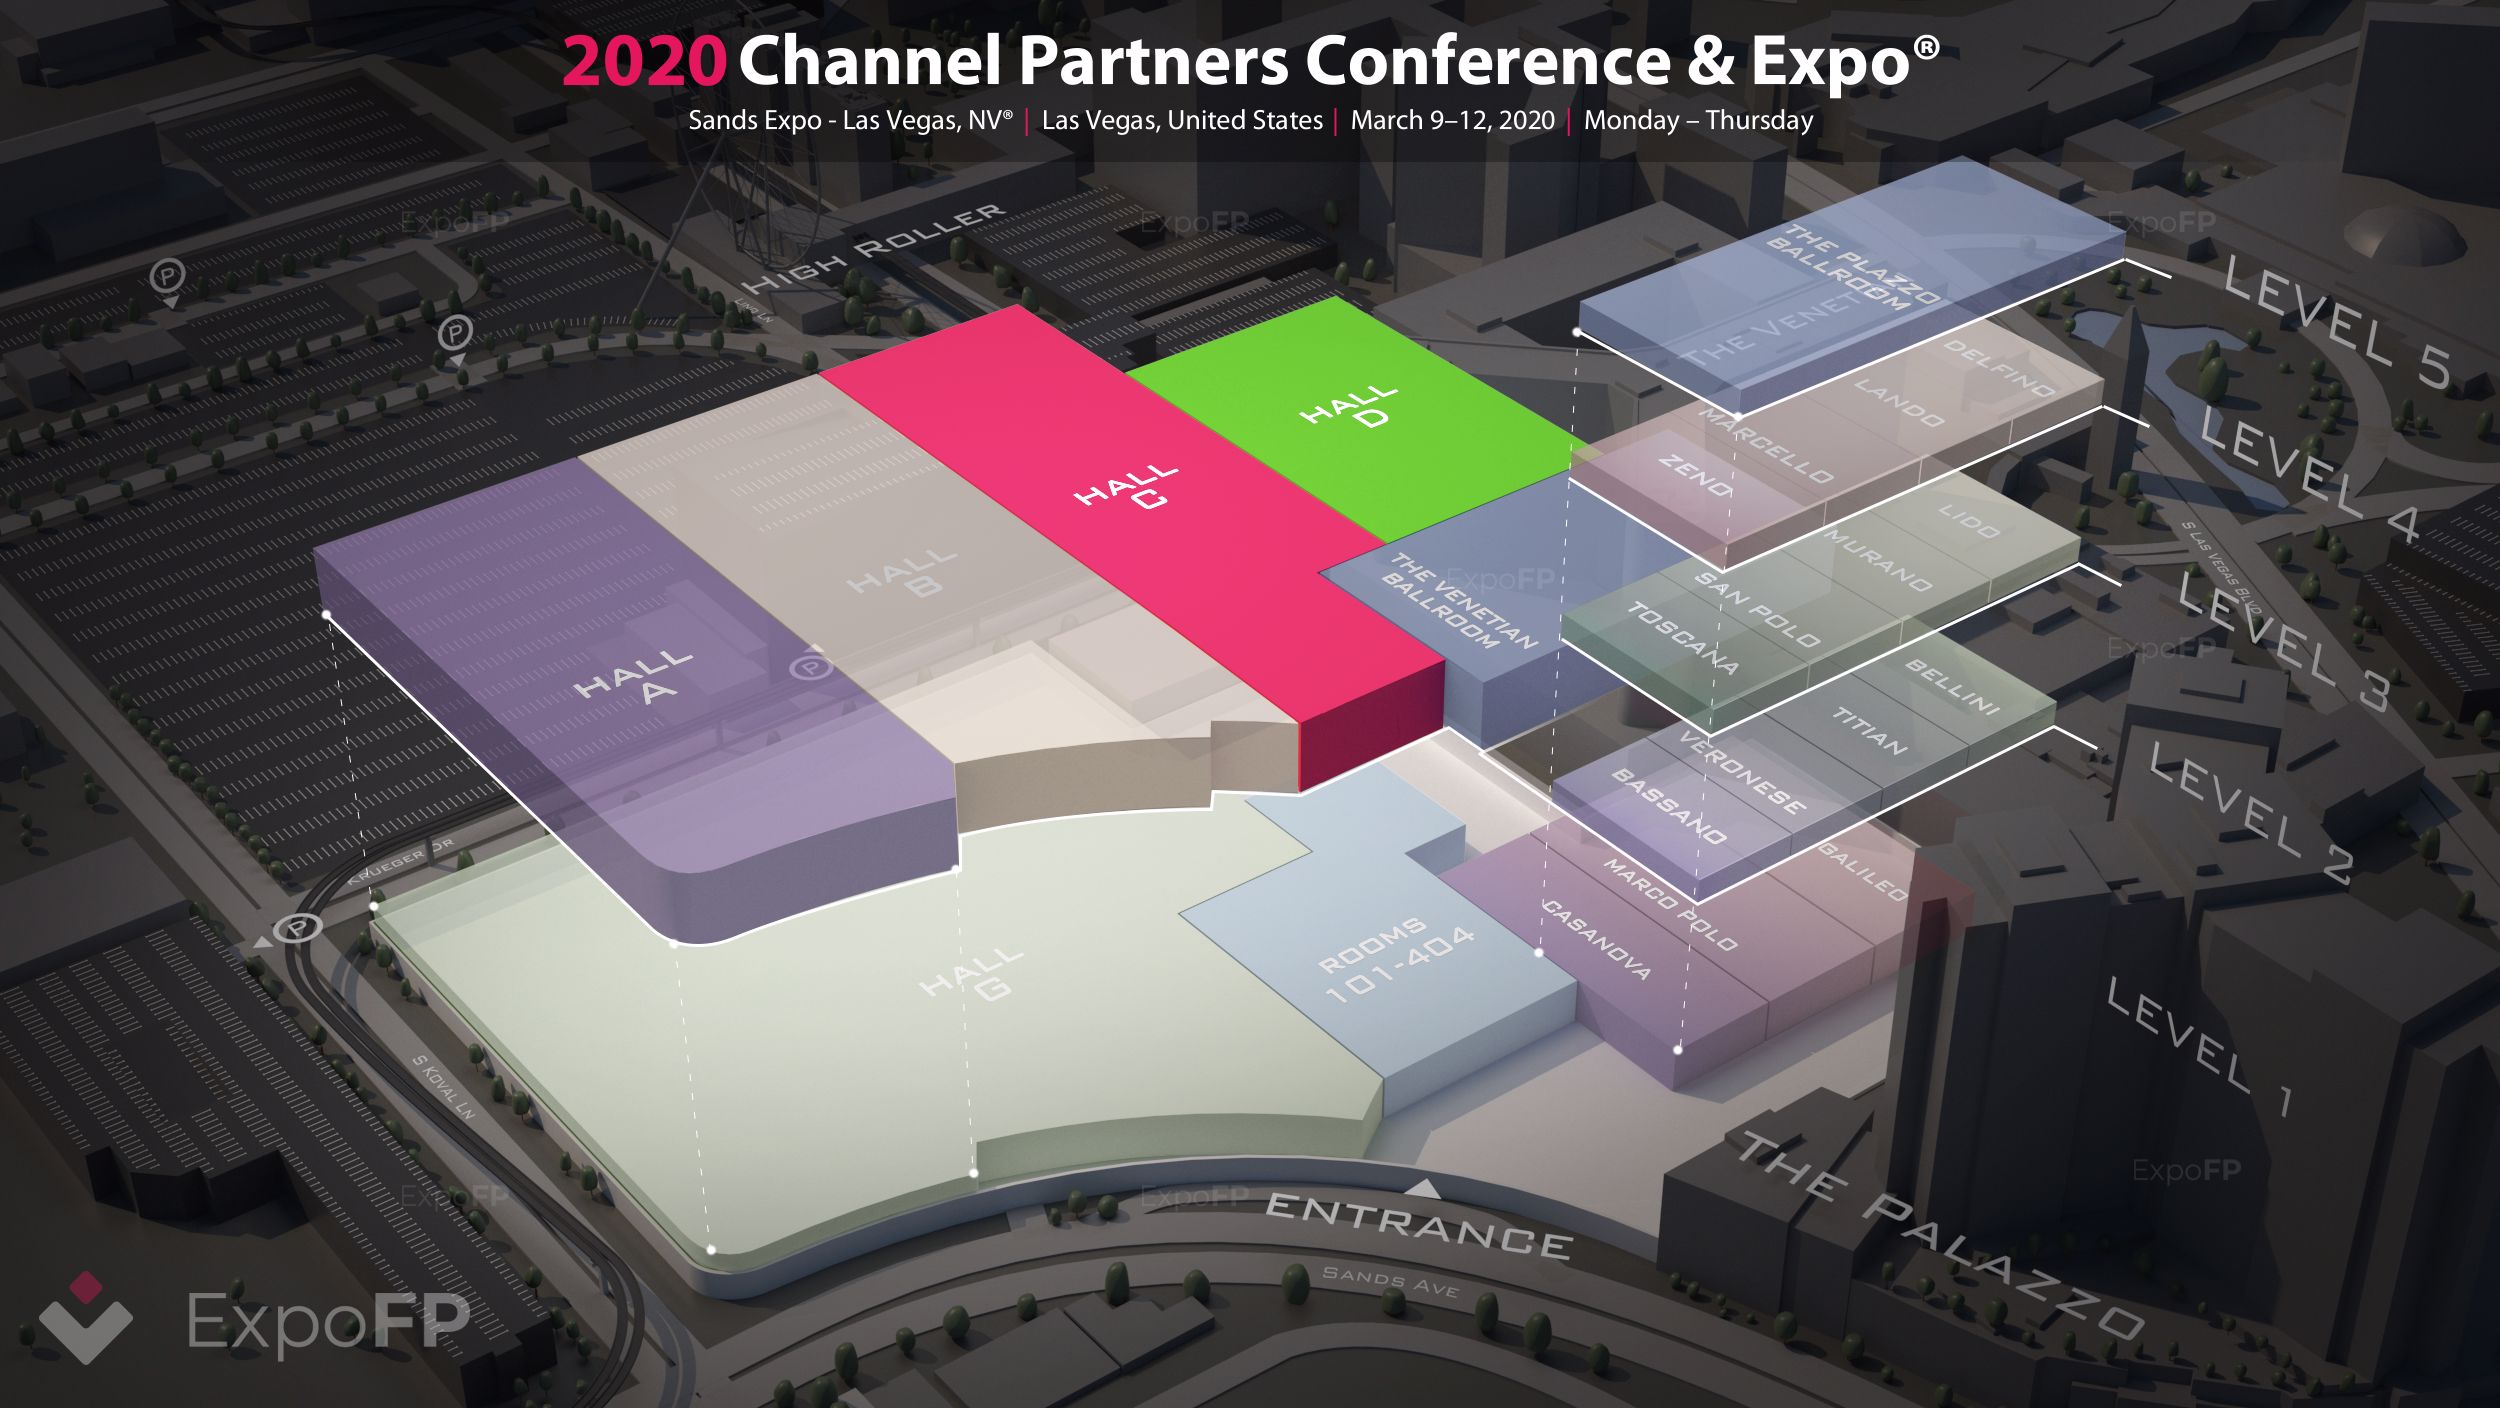 Channel Partners Conference & Expo 2020 in Sands Expo